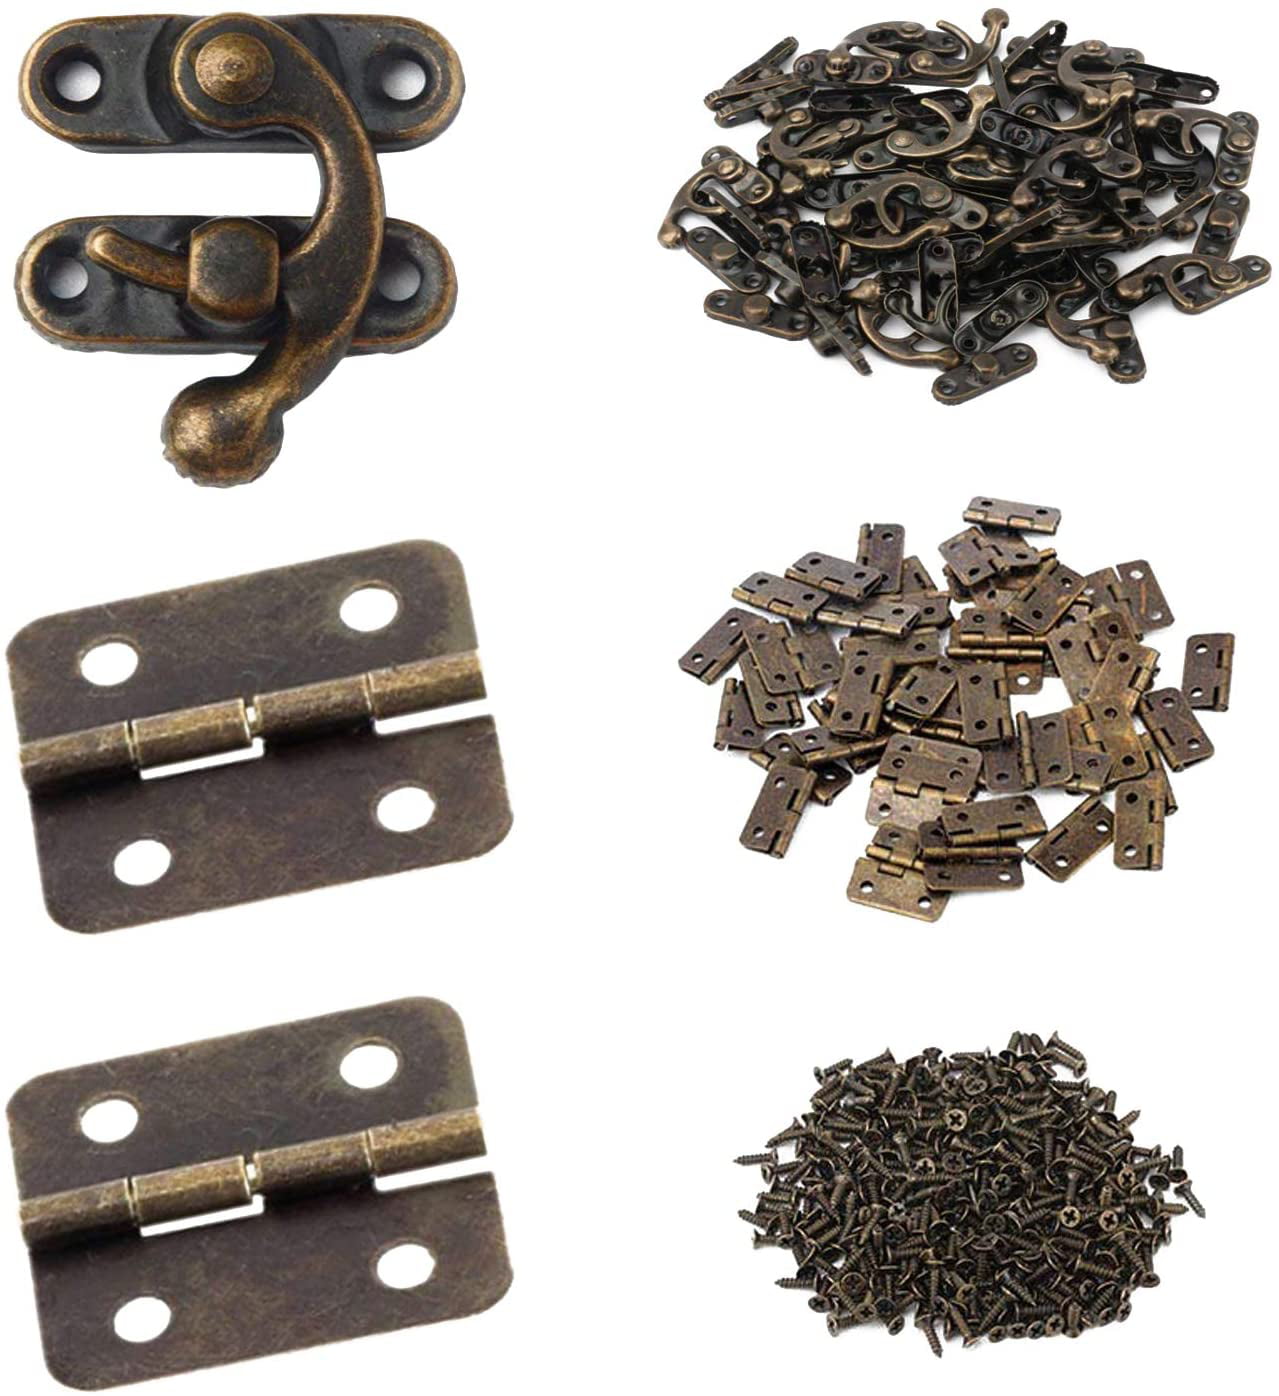 Antique Latch Hasp for Wood Jewelry Box 29x19mm Baoblaze 12pcs Small Box Hinges Mini Metal Lock with Screws Brown